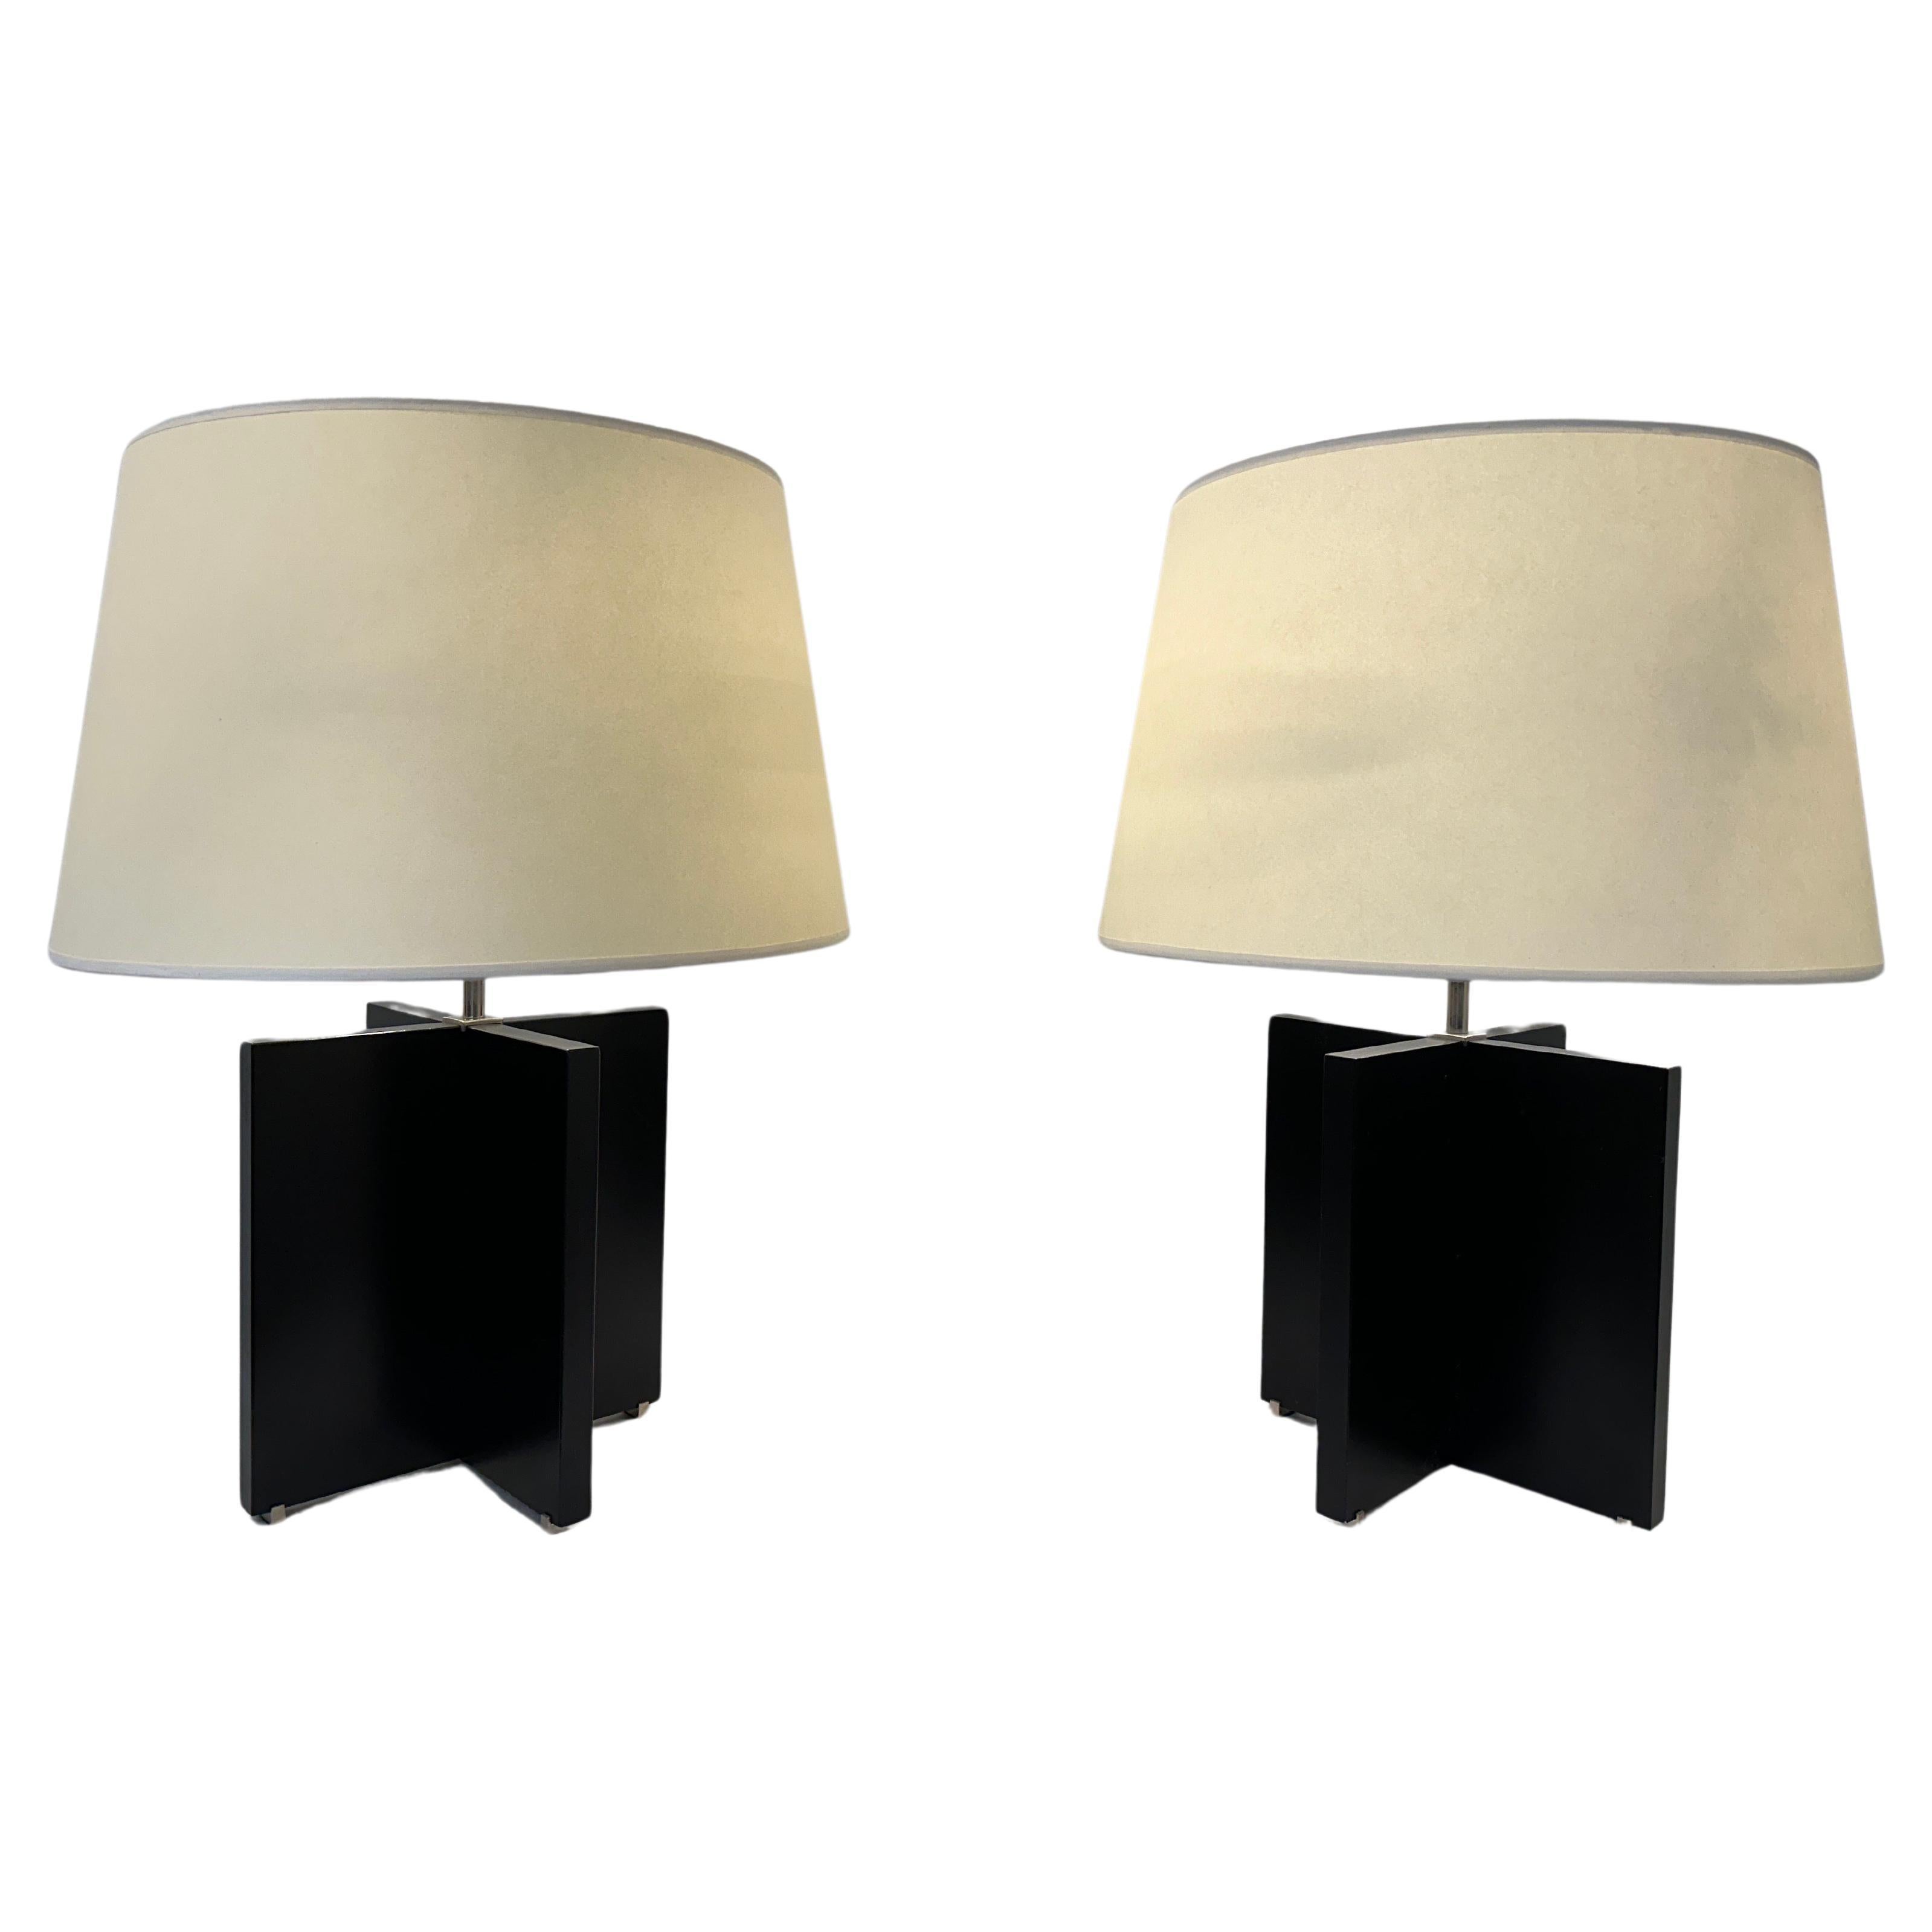 Rare Pair of Nessen "X" Shaped Table Lamps